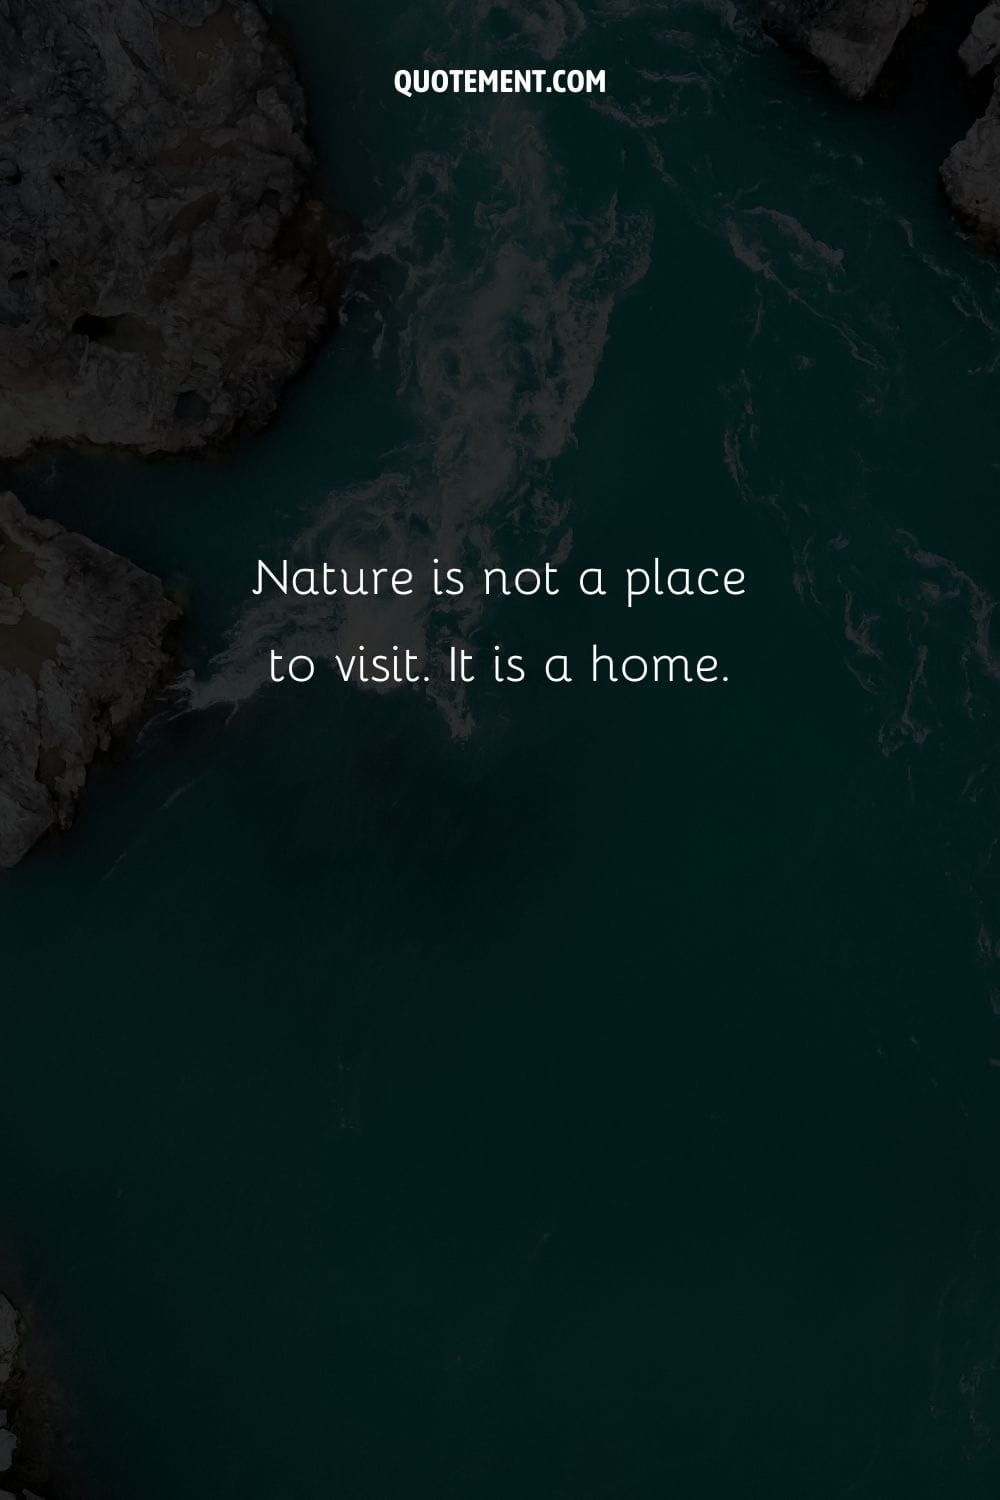 beautiful water scenery representing powerful river quote in nature